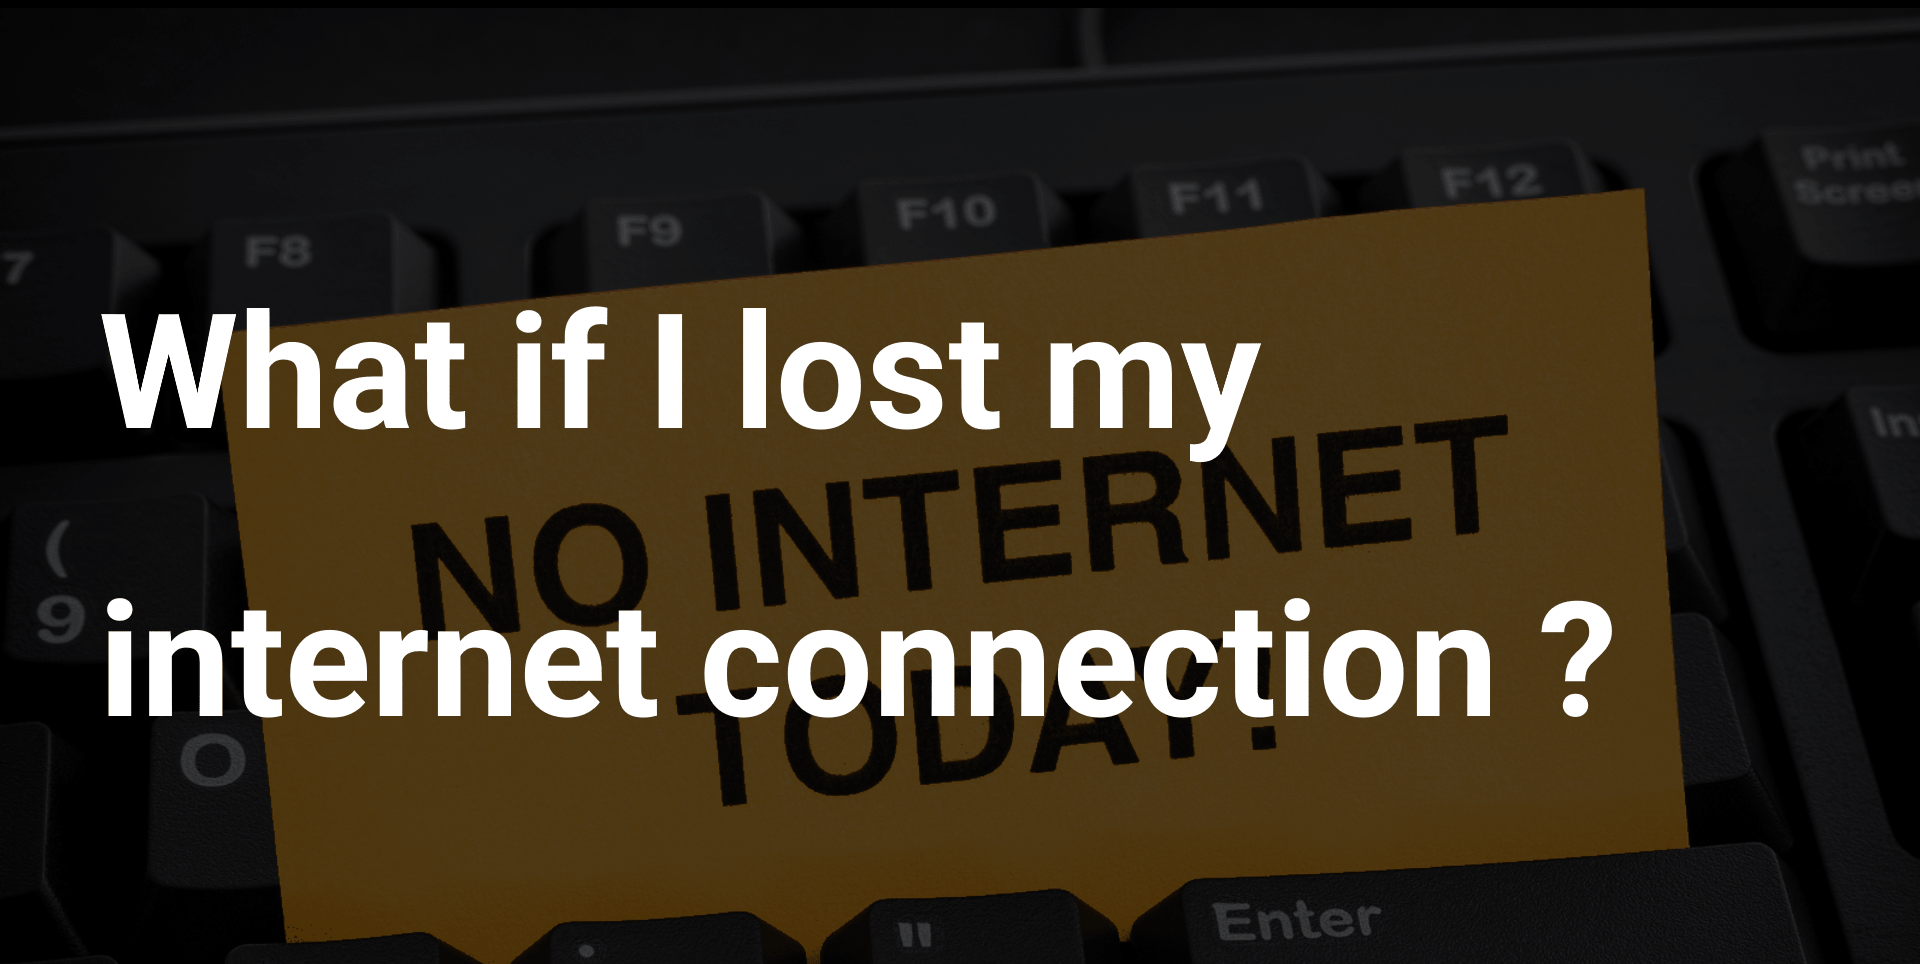 What if I lost my internet connection?